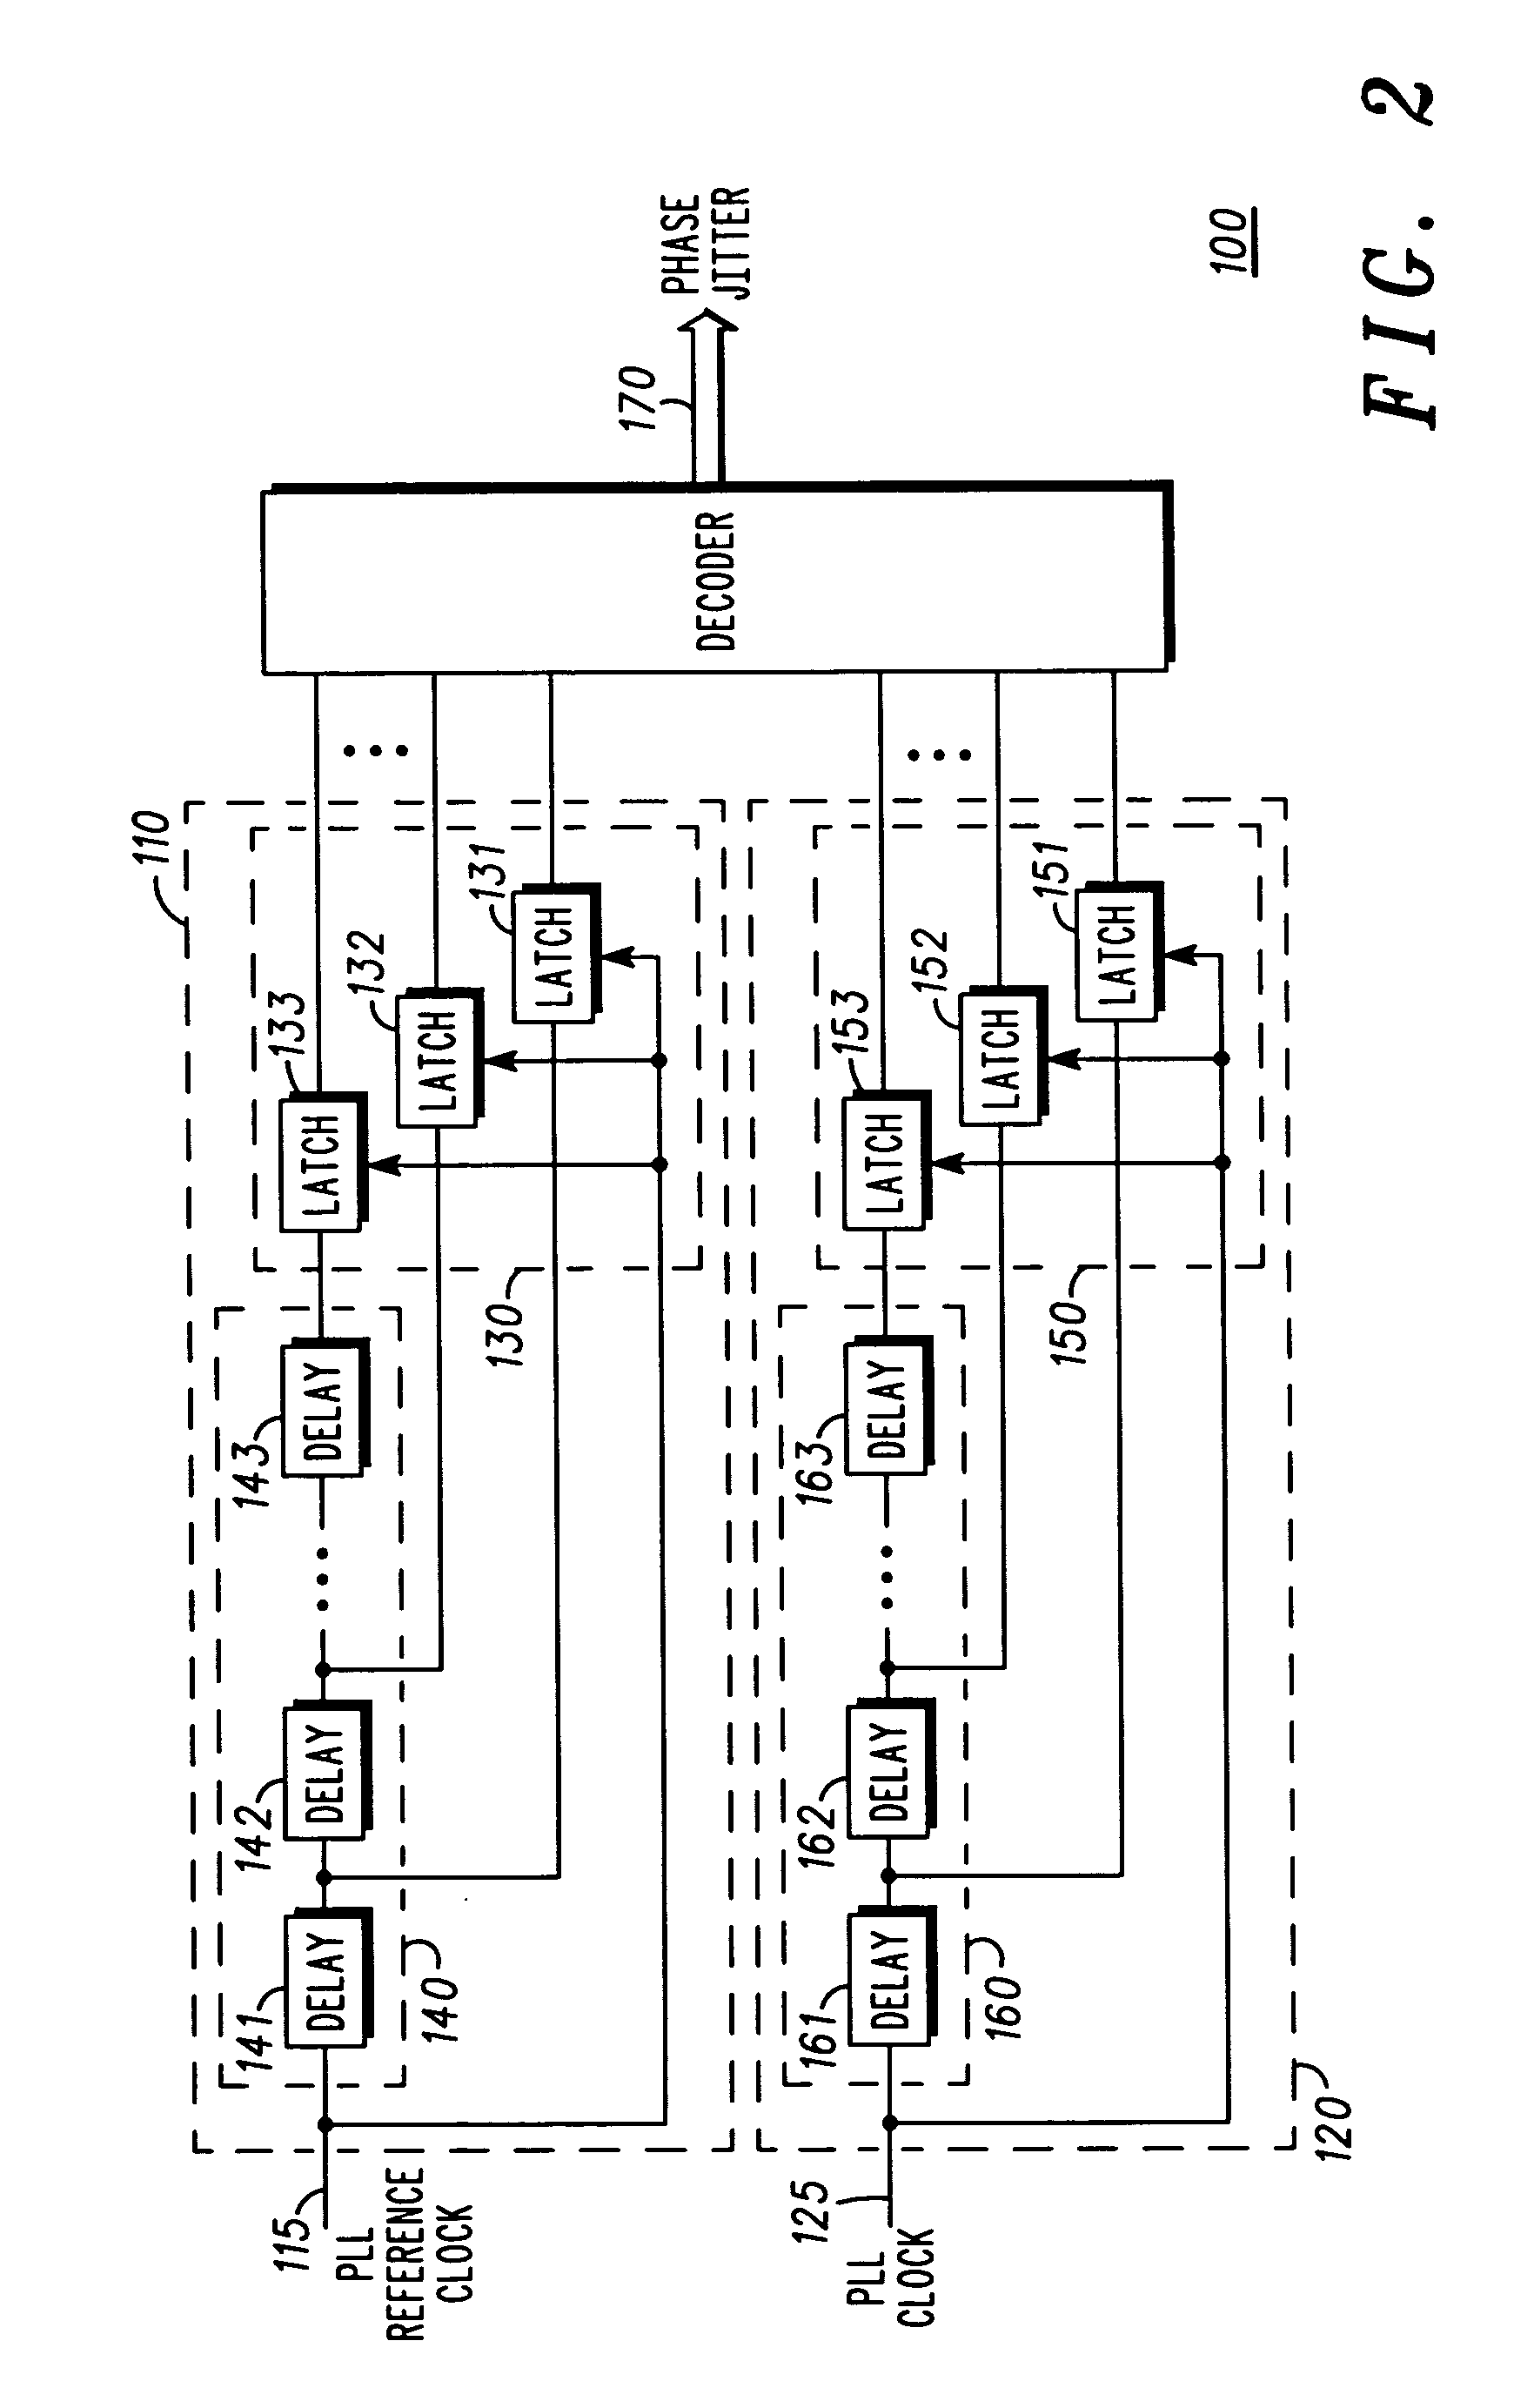 Module, system and method for testing a phase locked loop